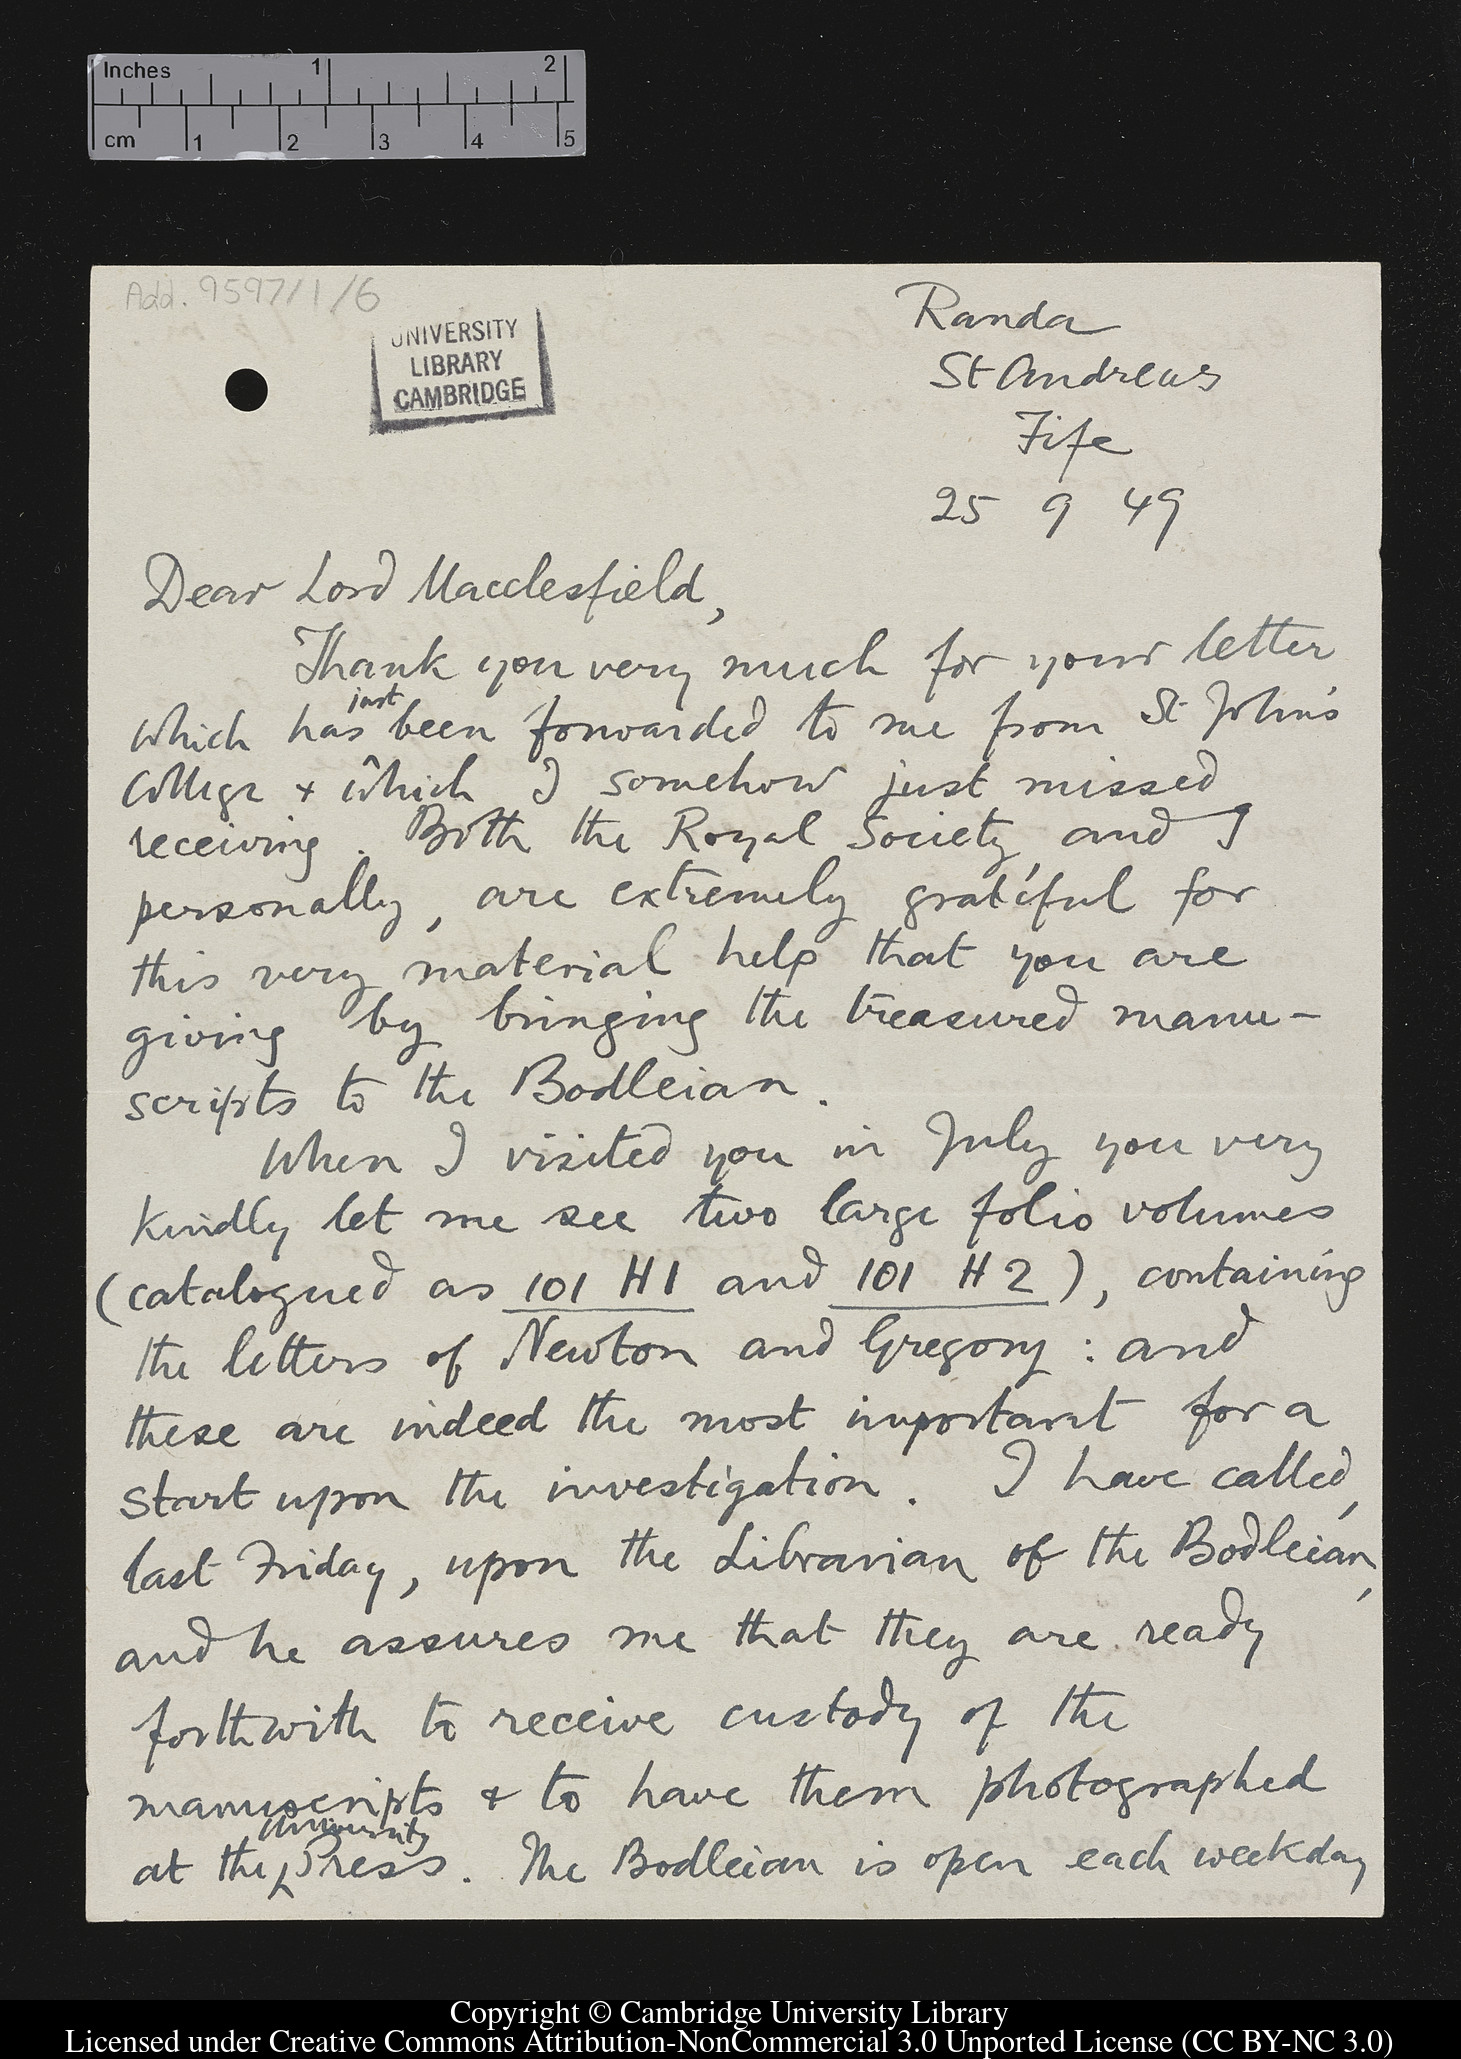 Letter to Lord Macclesfield from H.W. Turnbull